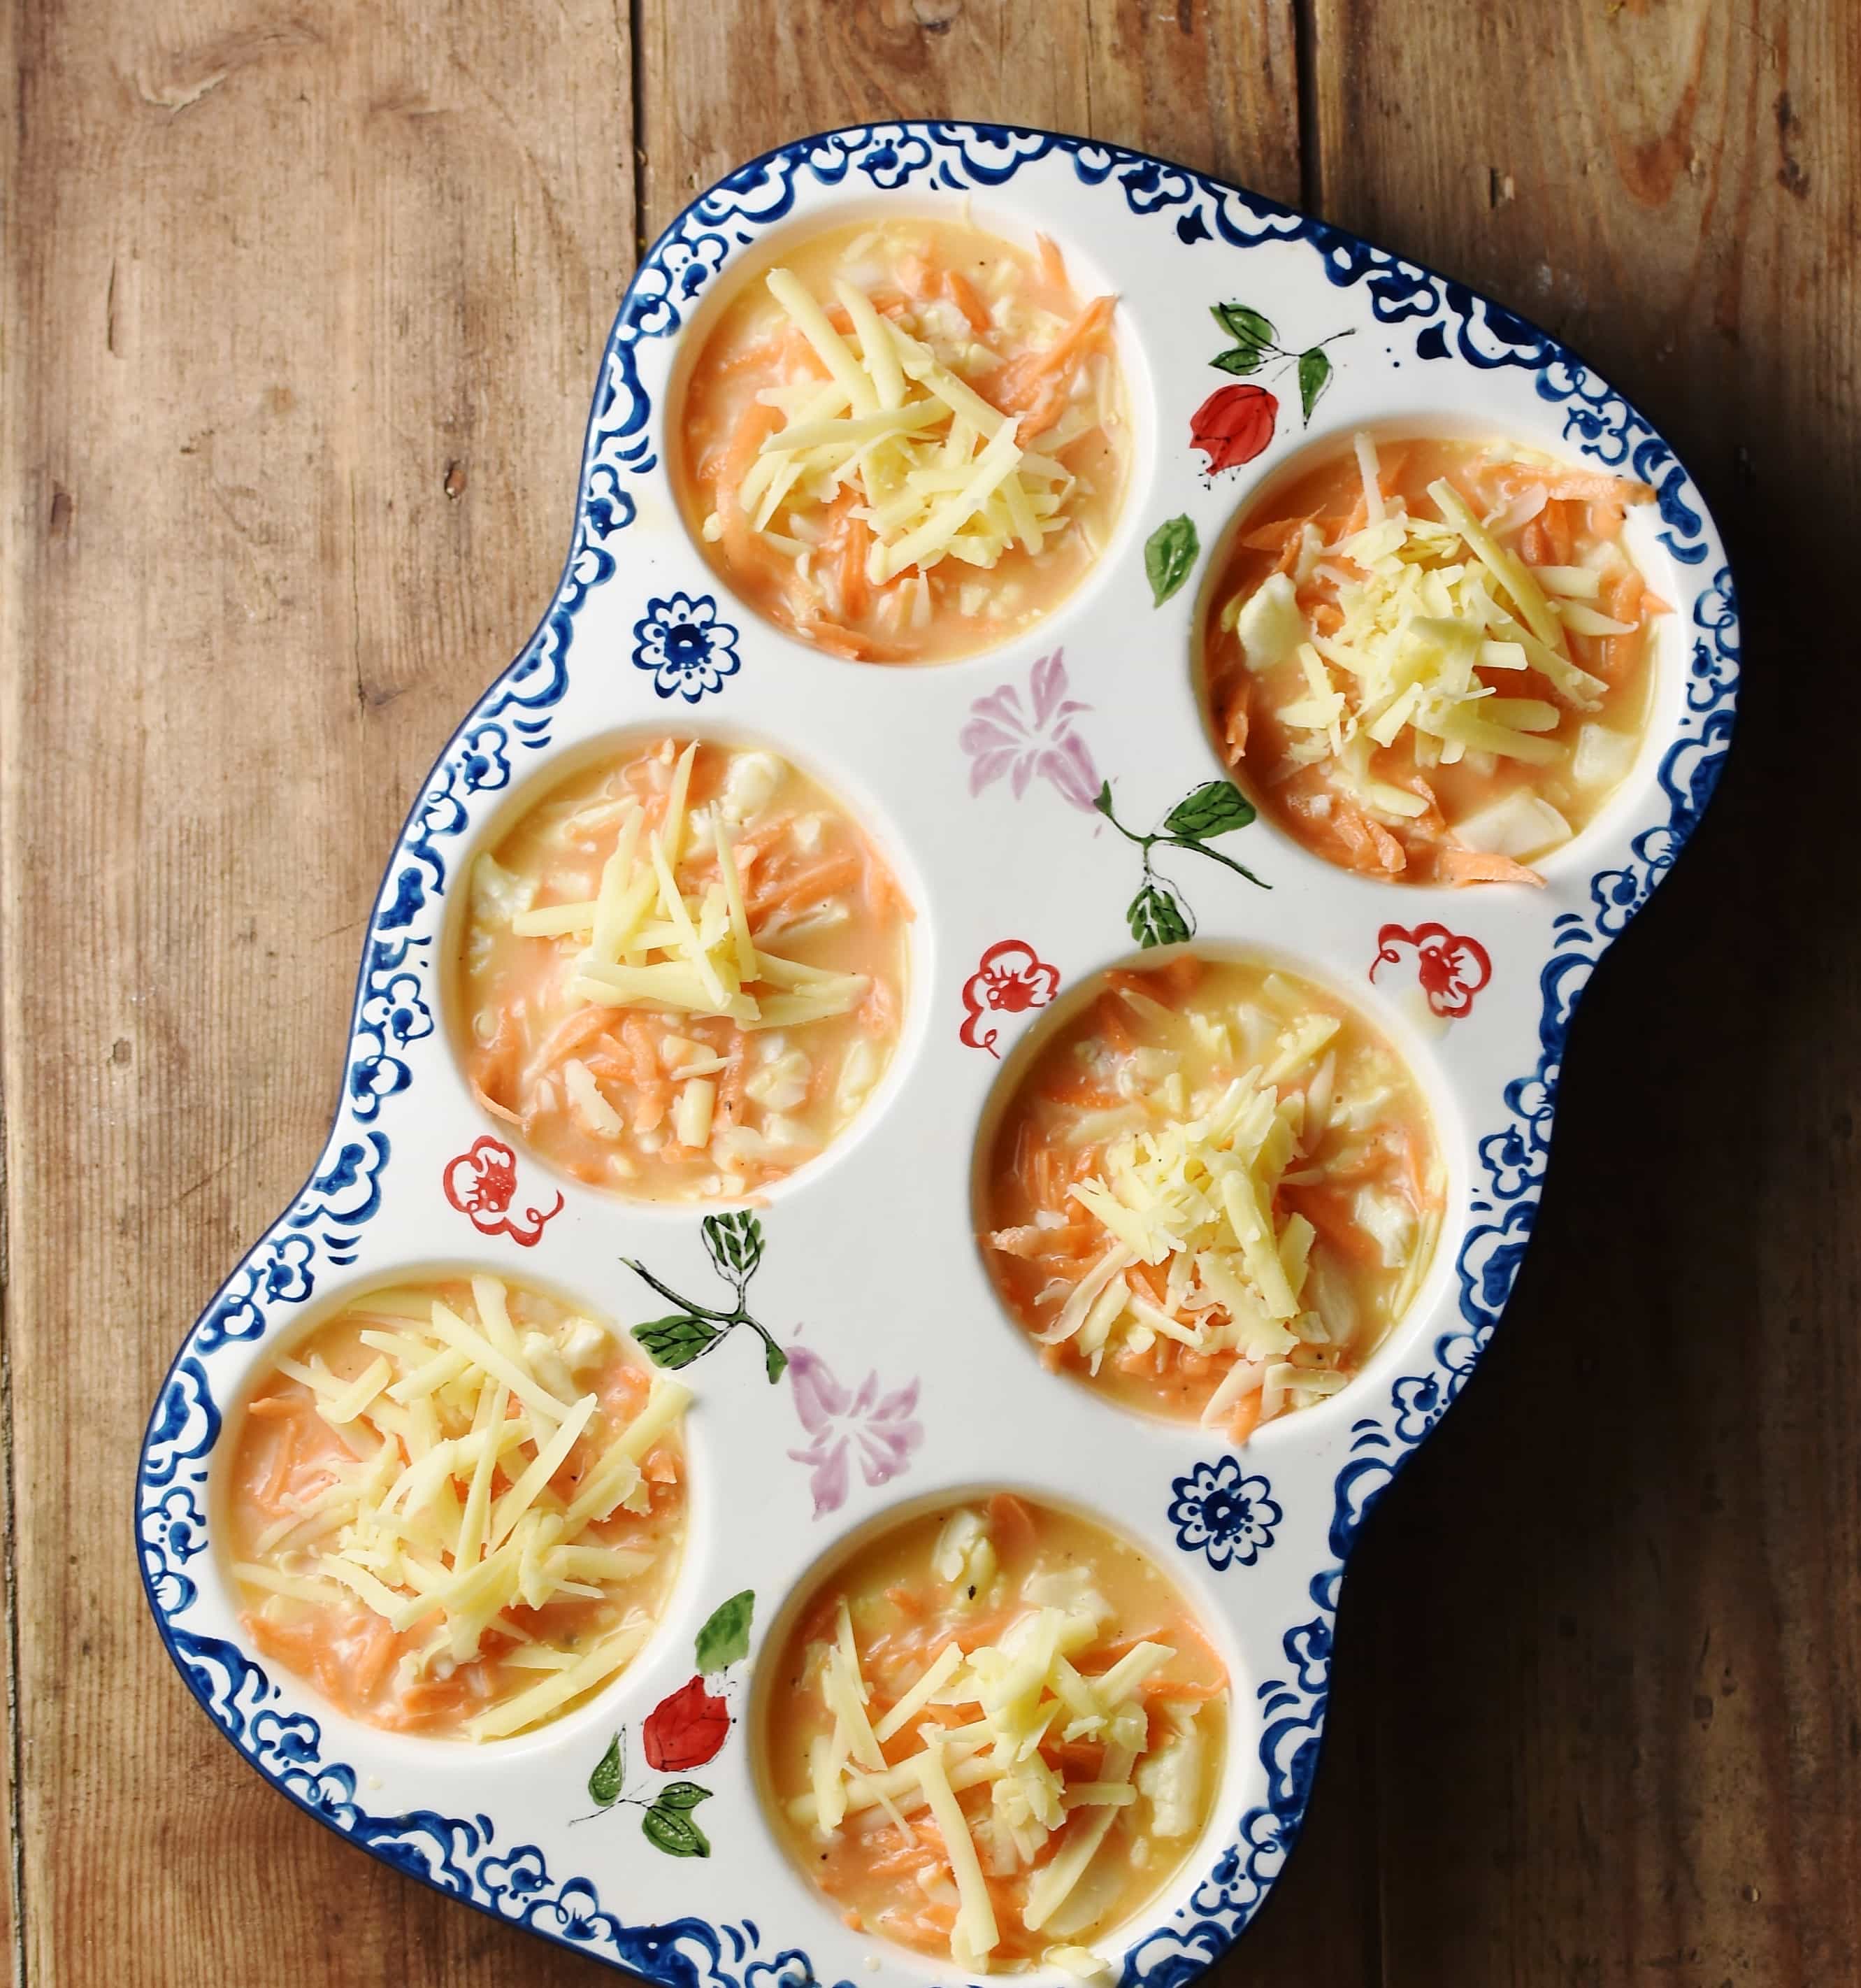 Sweet potato and egg mixture in 6-hole ceramic muffin pan with blue flower pattern.